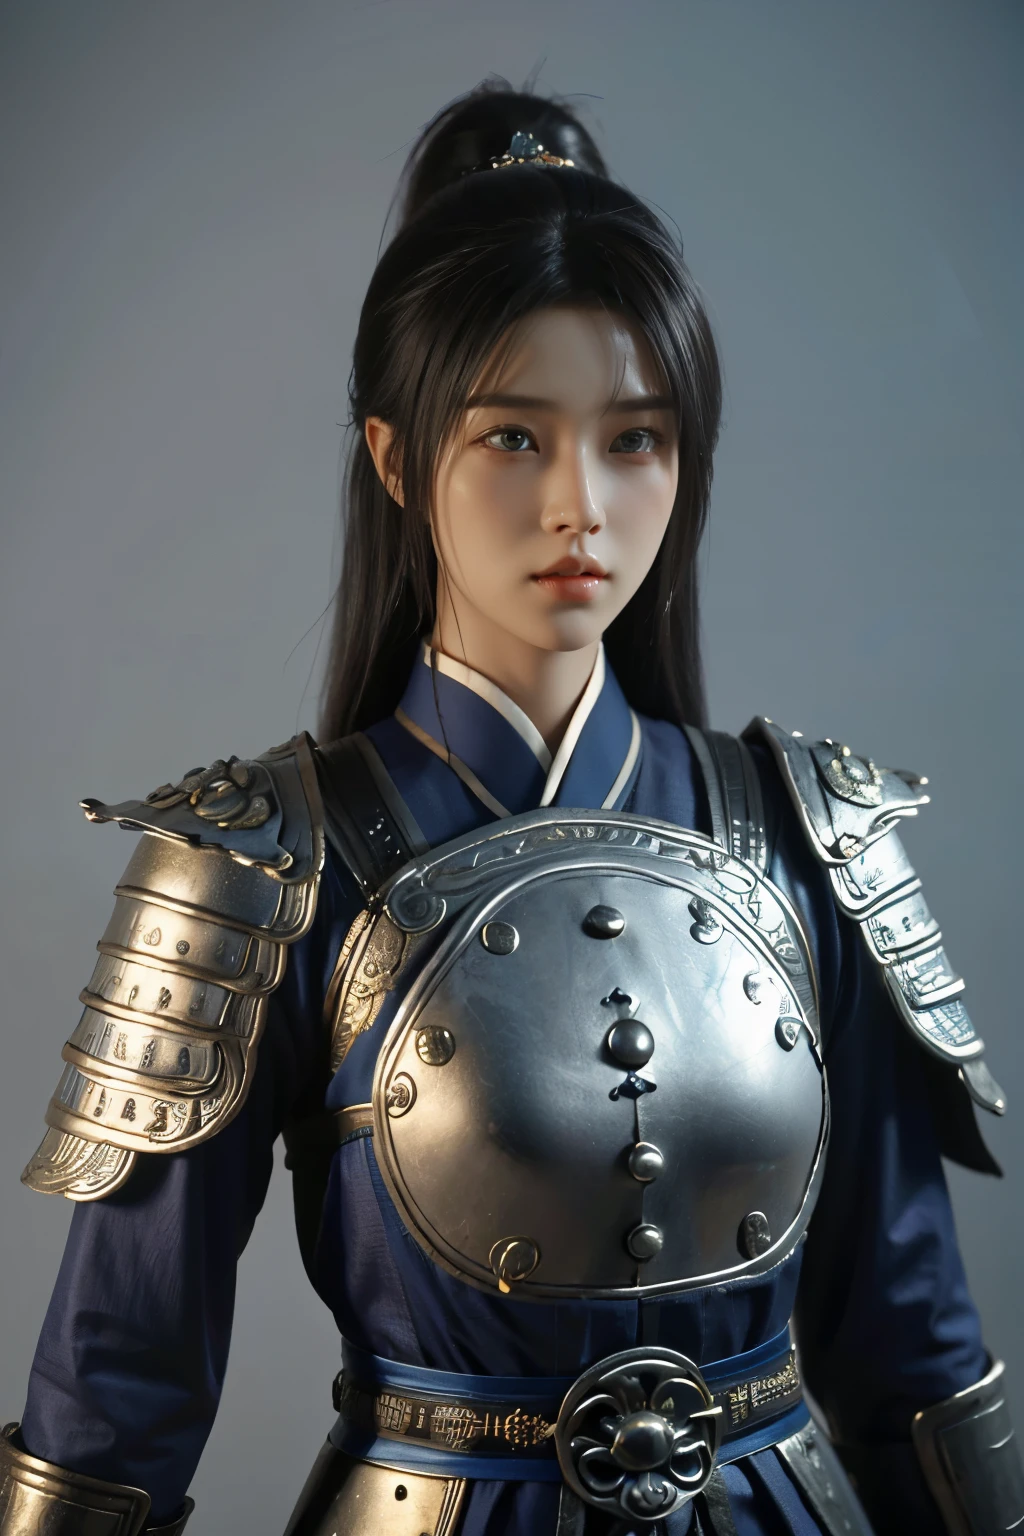 Game art，The best picture quality，Highest resolution，8K，(A bust photograph)，(Portrait)，(Head close-up)，(Rule of thirds)，Unreal Engine 5 rendering works， (The Girl of the Future)，(Female Warrior)， 
15-year-old girl，(The generals of ancient China)，An eye rich in detail，(Big breasts)，Elegant and noble，indifferent，brave，
(Wearing ancient Chinese style armor，Armor of Song Dynasty，Costumes are rich in detail，Metallic luster，Silver gray)，Chinese Characters，Fantasy style，
Photo poses，Field background，Movie lights，Ray tracing，Game CG，((3D Unreal Engine))，oc rendering reflection pattern